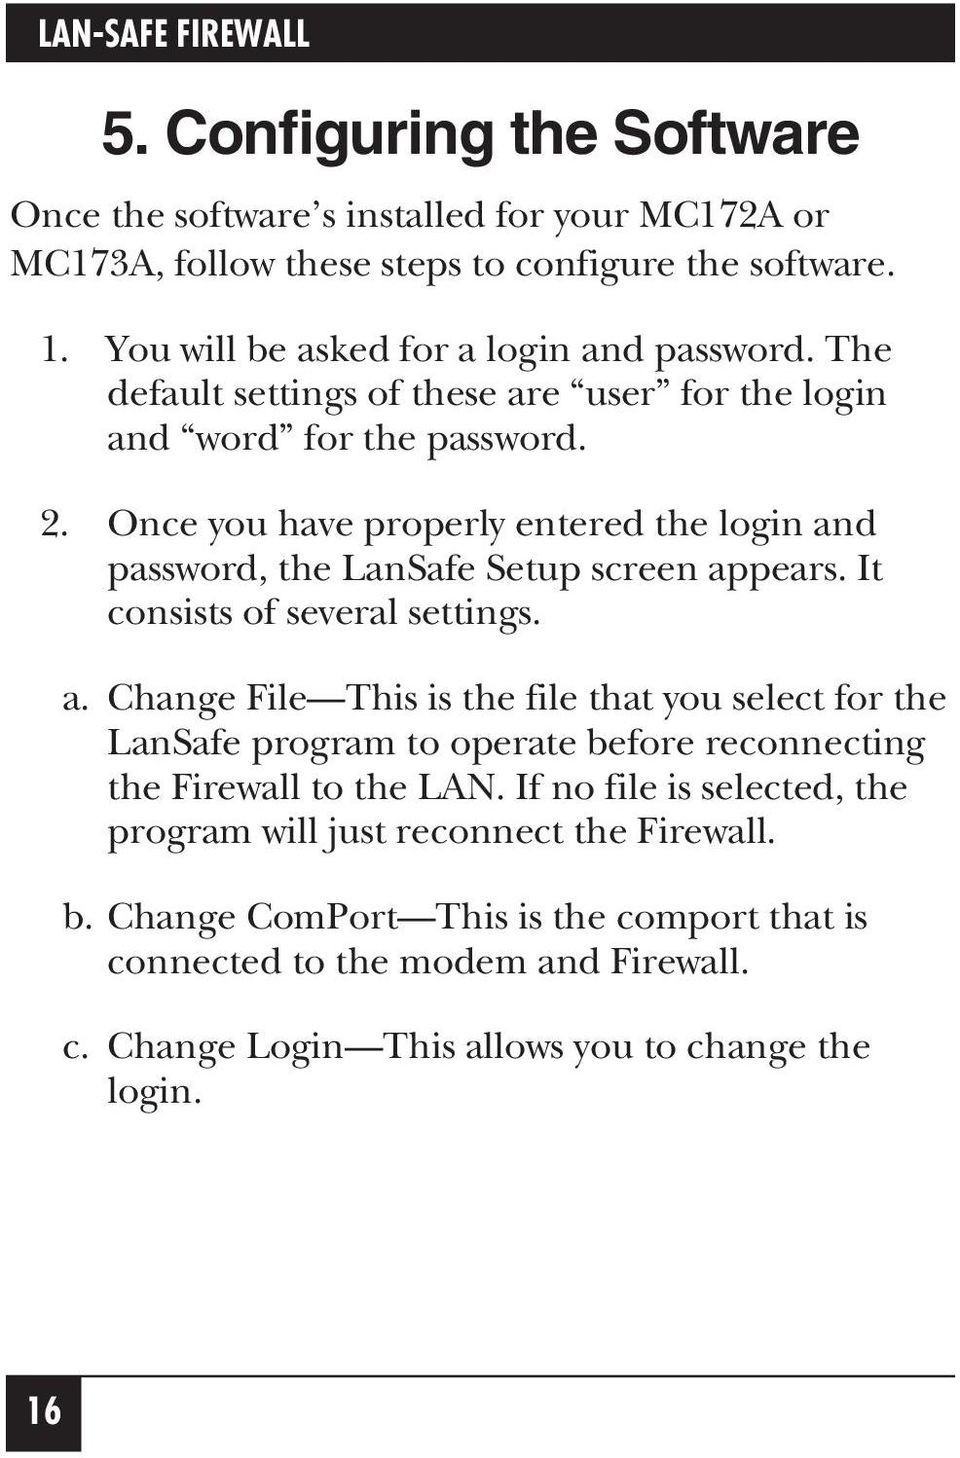 It consists of several settings. a. Change File This is the file that you select for the LanSafe program to operate before reconnecting the Firewall to the LAN.